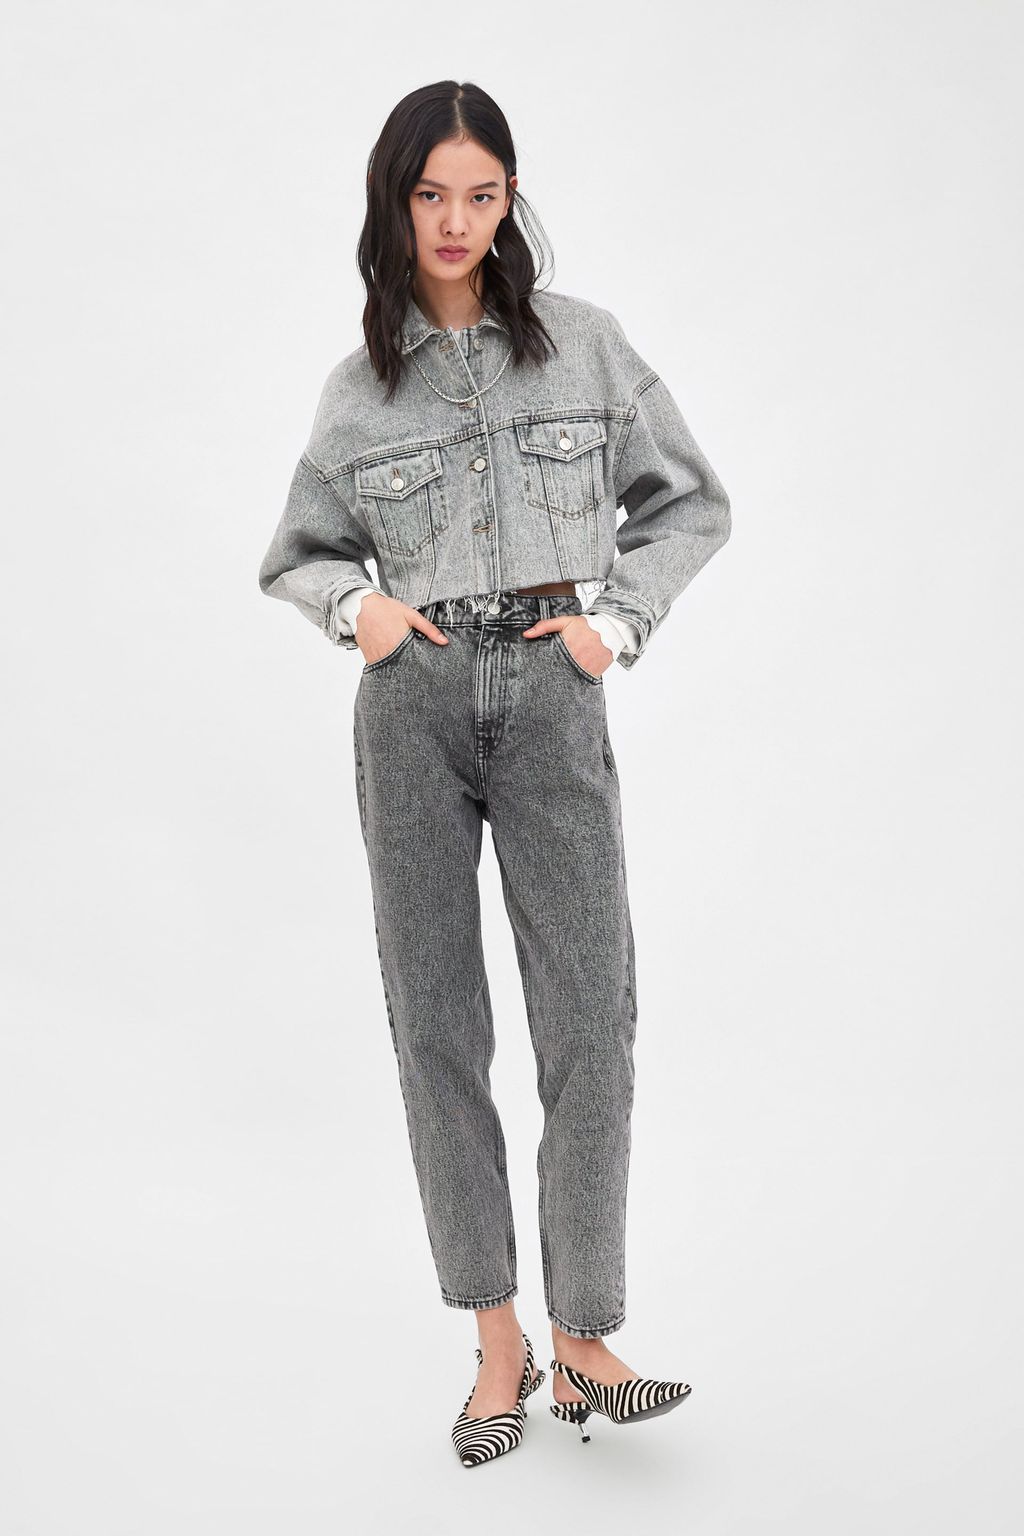 The 5 Most Popular 2019 Denim Trends at Zara | Who What Wear